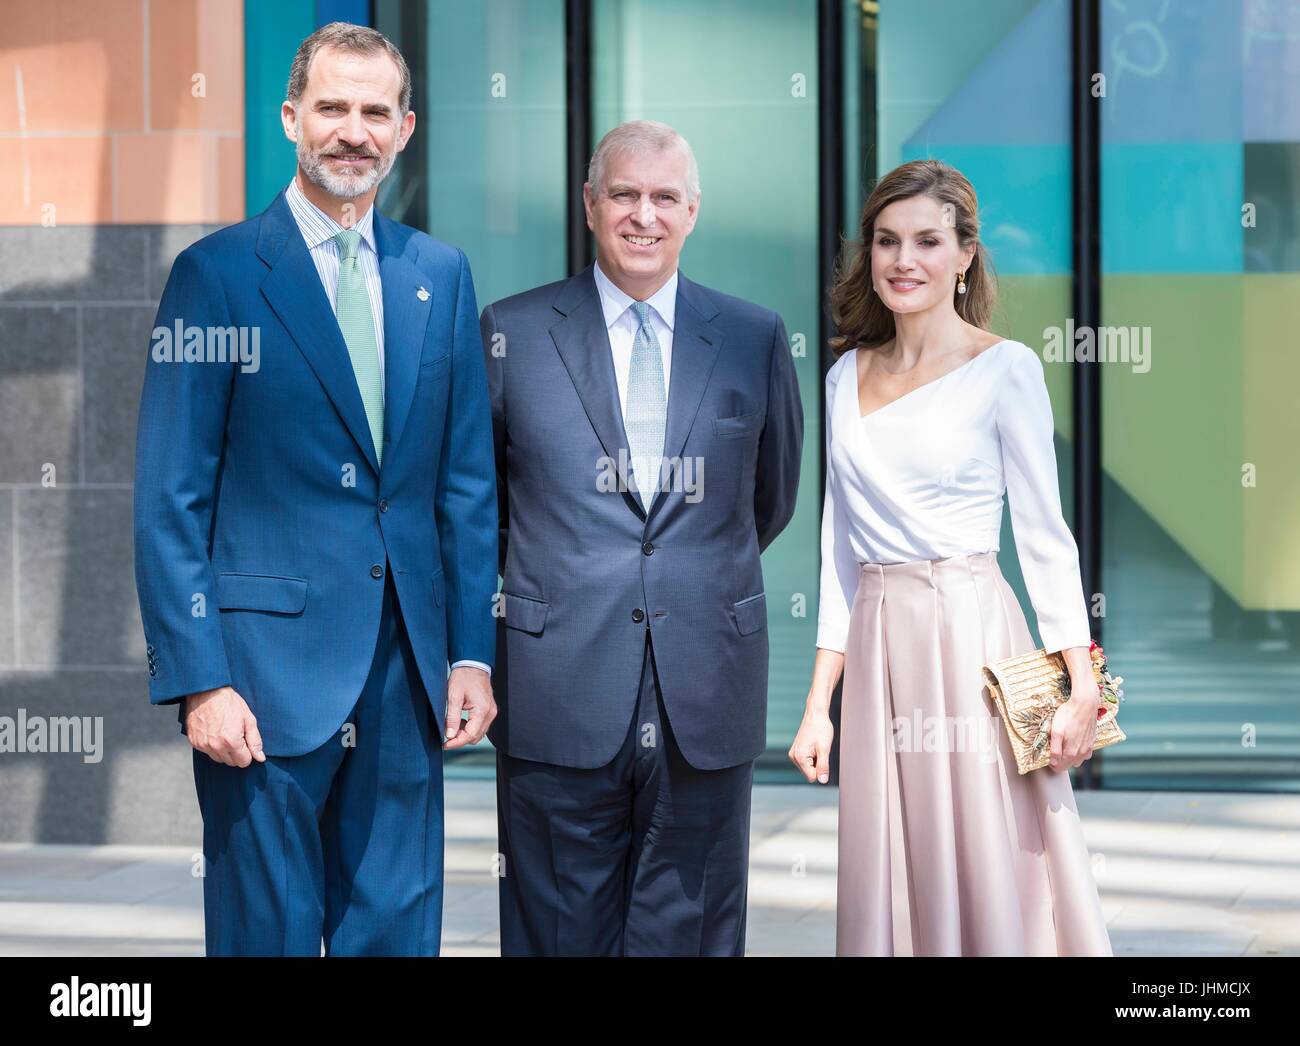 London, United Kingdom Of Great Britain And Northern Ireland. 14th July, 2017. Their Majesties, King Felipe VI of Spain and Queen Letizia with Duke of York visit the Francis Crick Institute. London, UK. 14/07/2017 | usage worldwide Credit: dpa/Alamy Live News Stock Photo